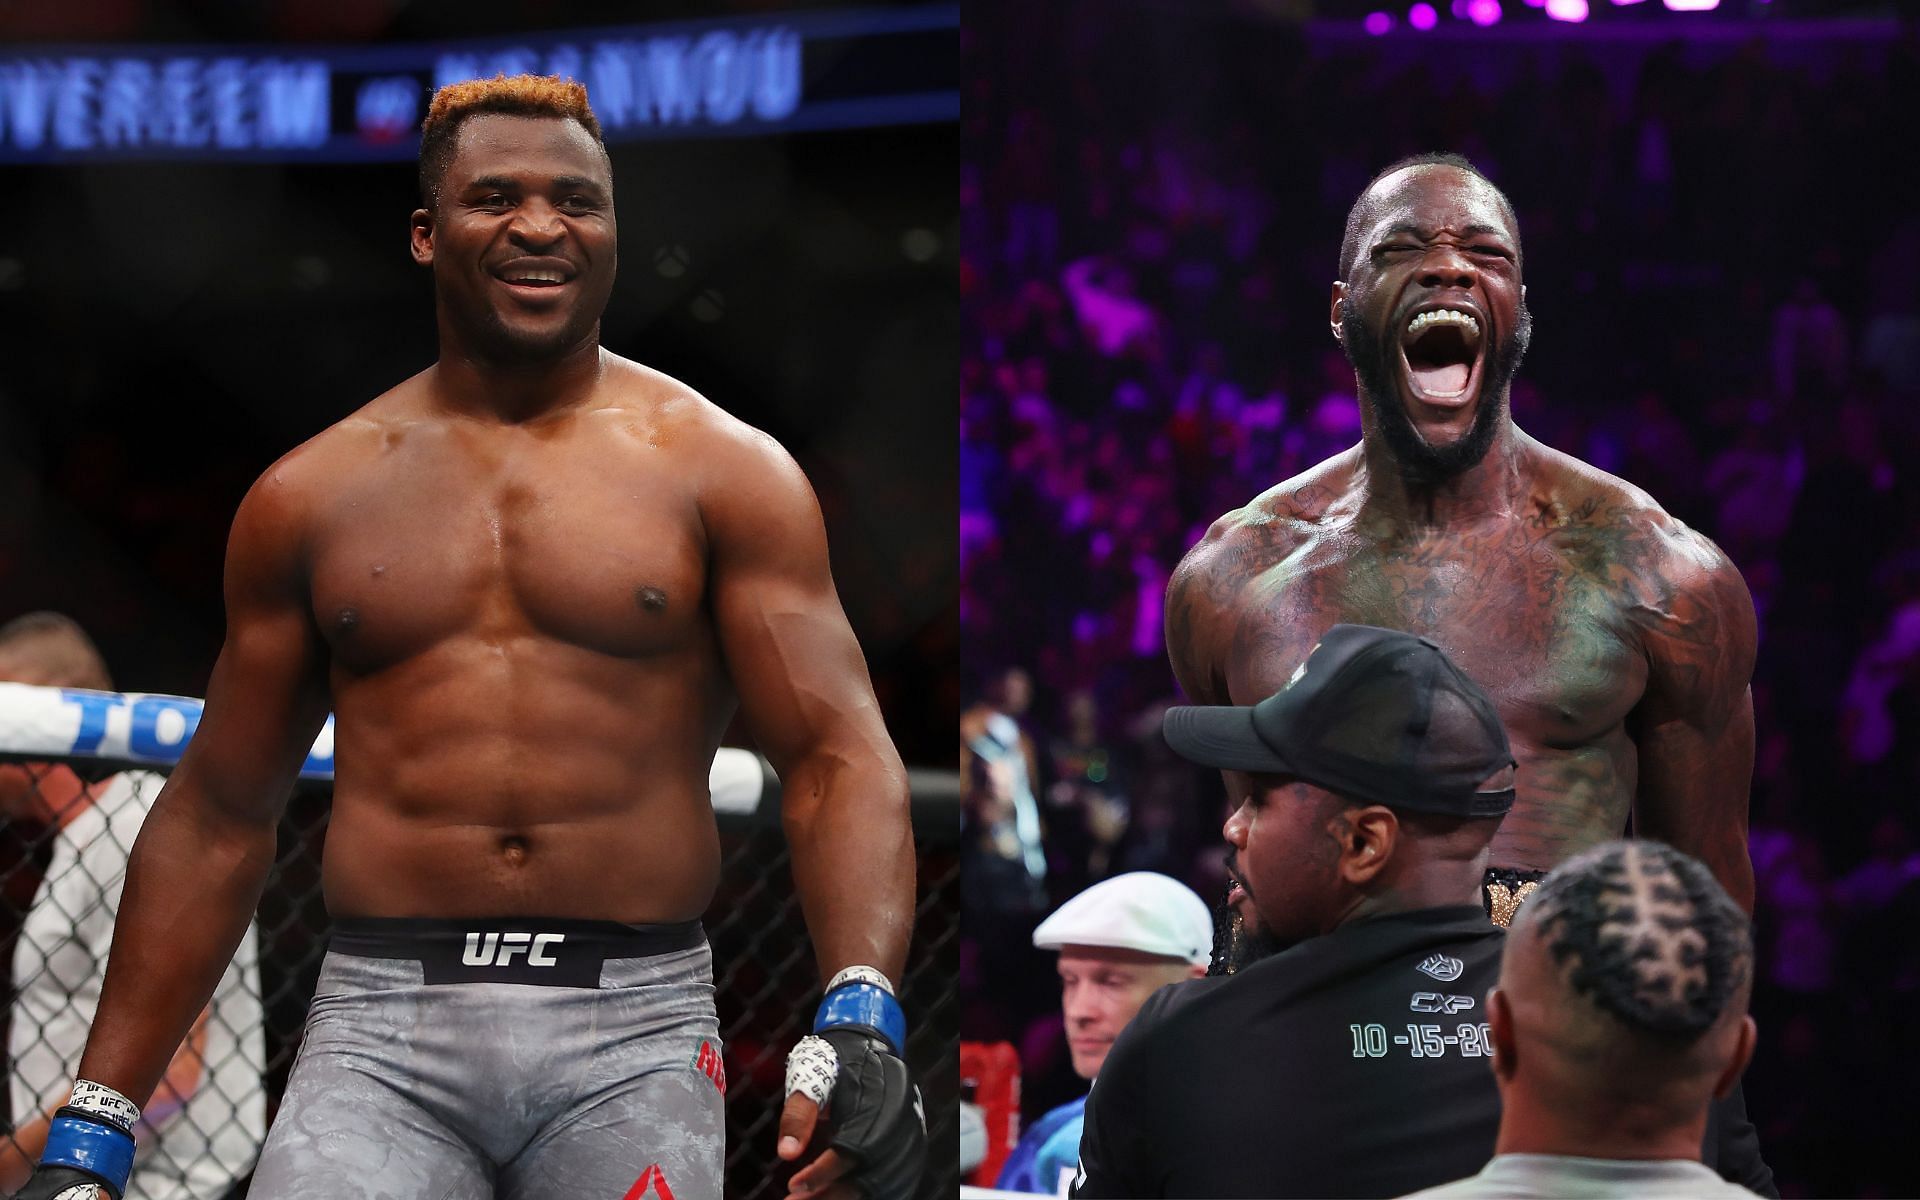 Francis Ngannou (left) and Deontay Wilder (right). [via Getty Images]